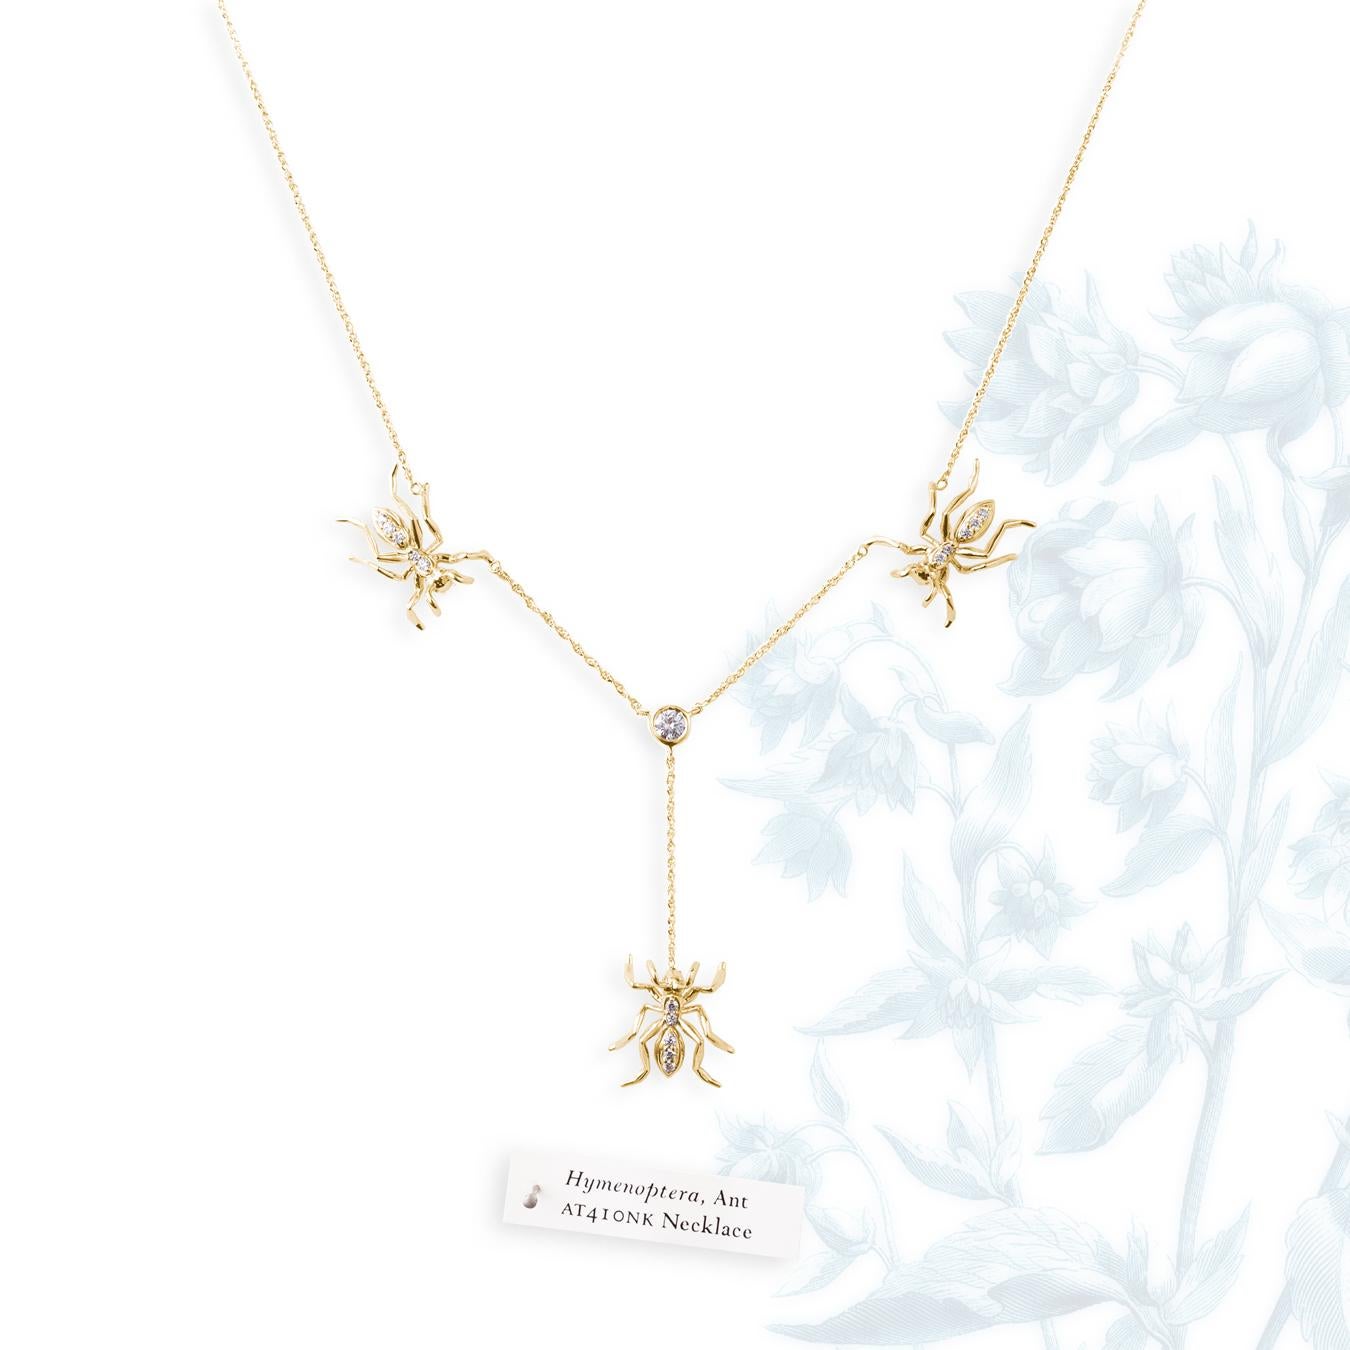 Brilliant Cut 3 Ant Lariat Necklace Yellow Gold Diamonds For Sale